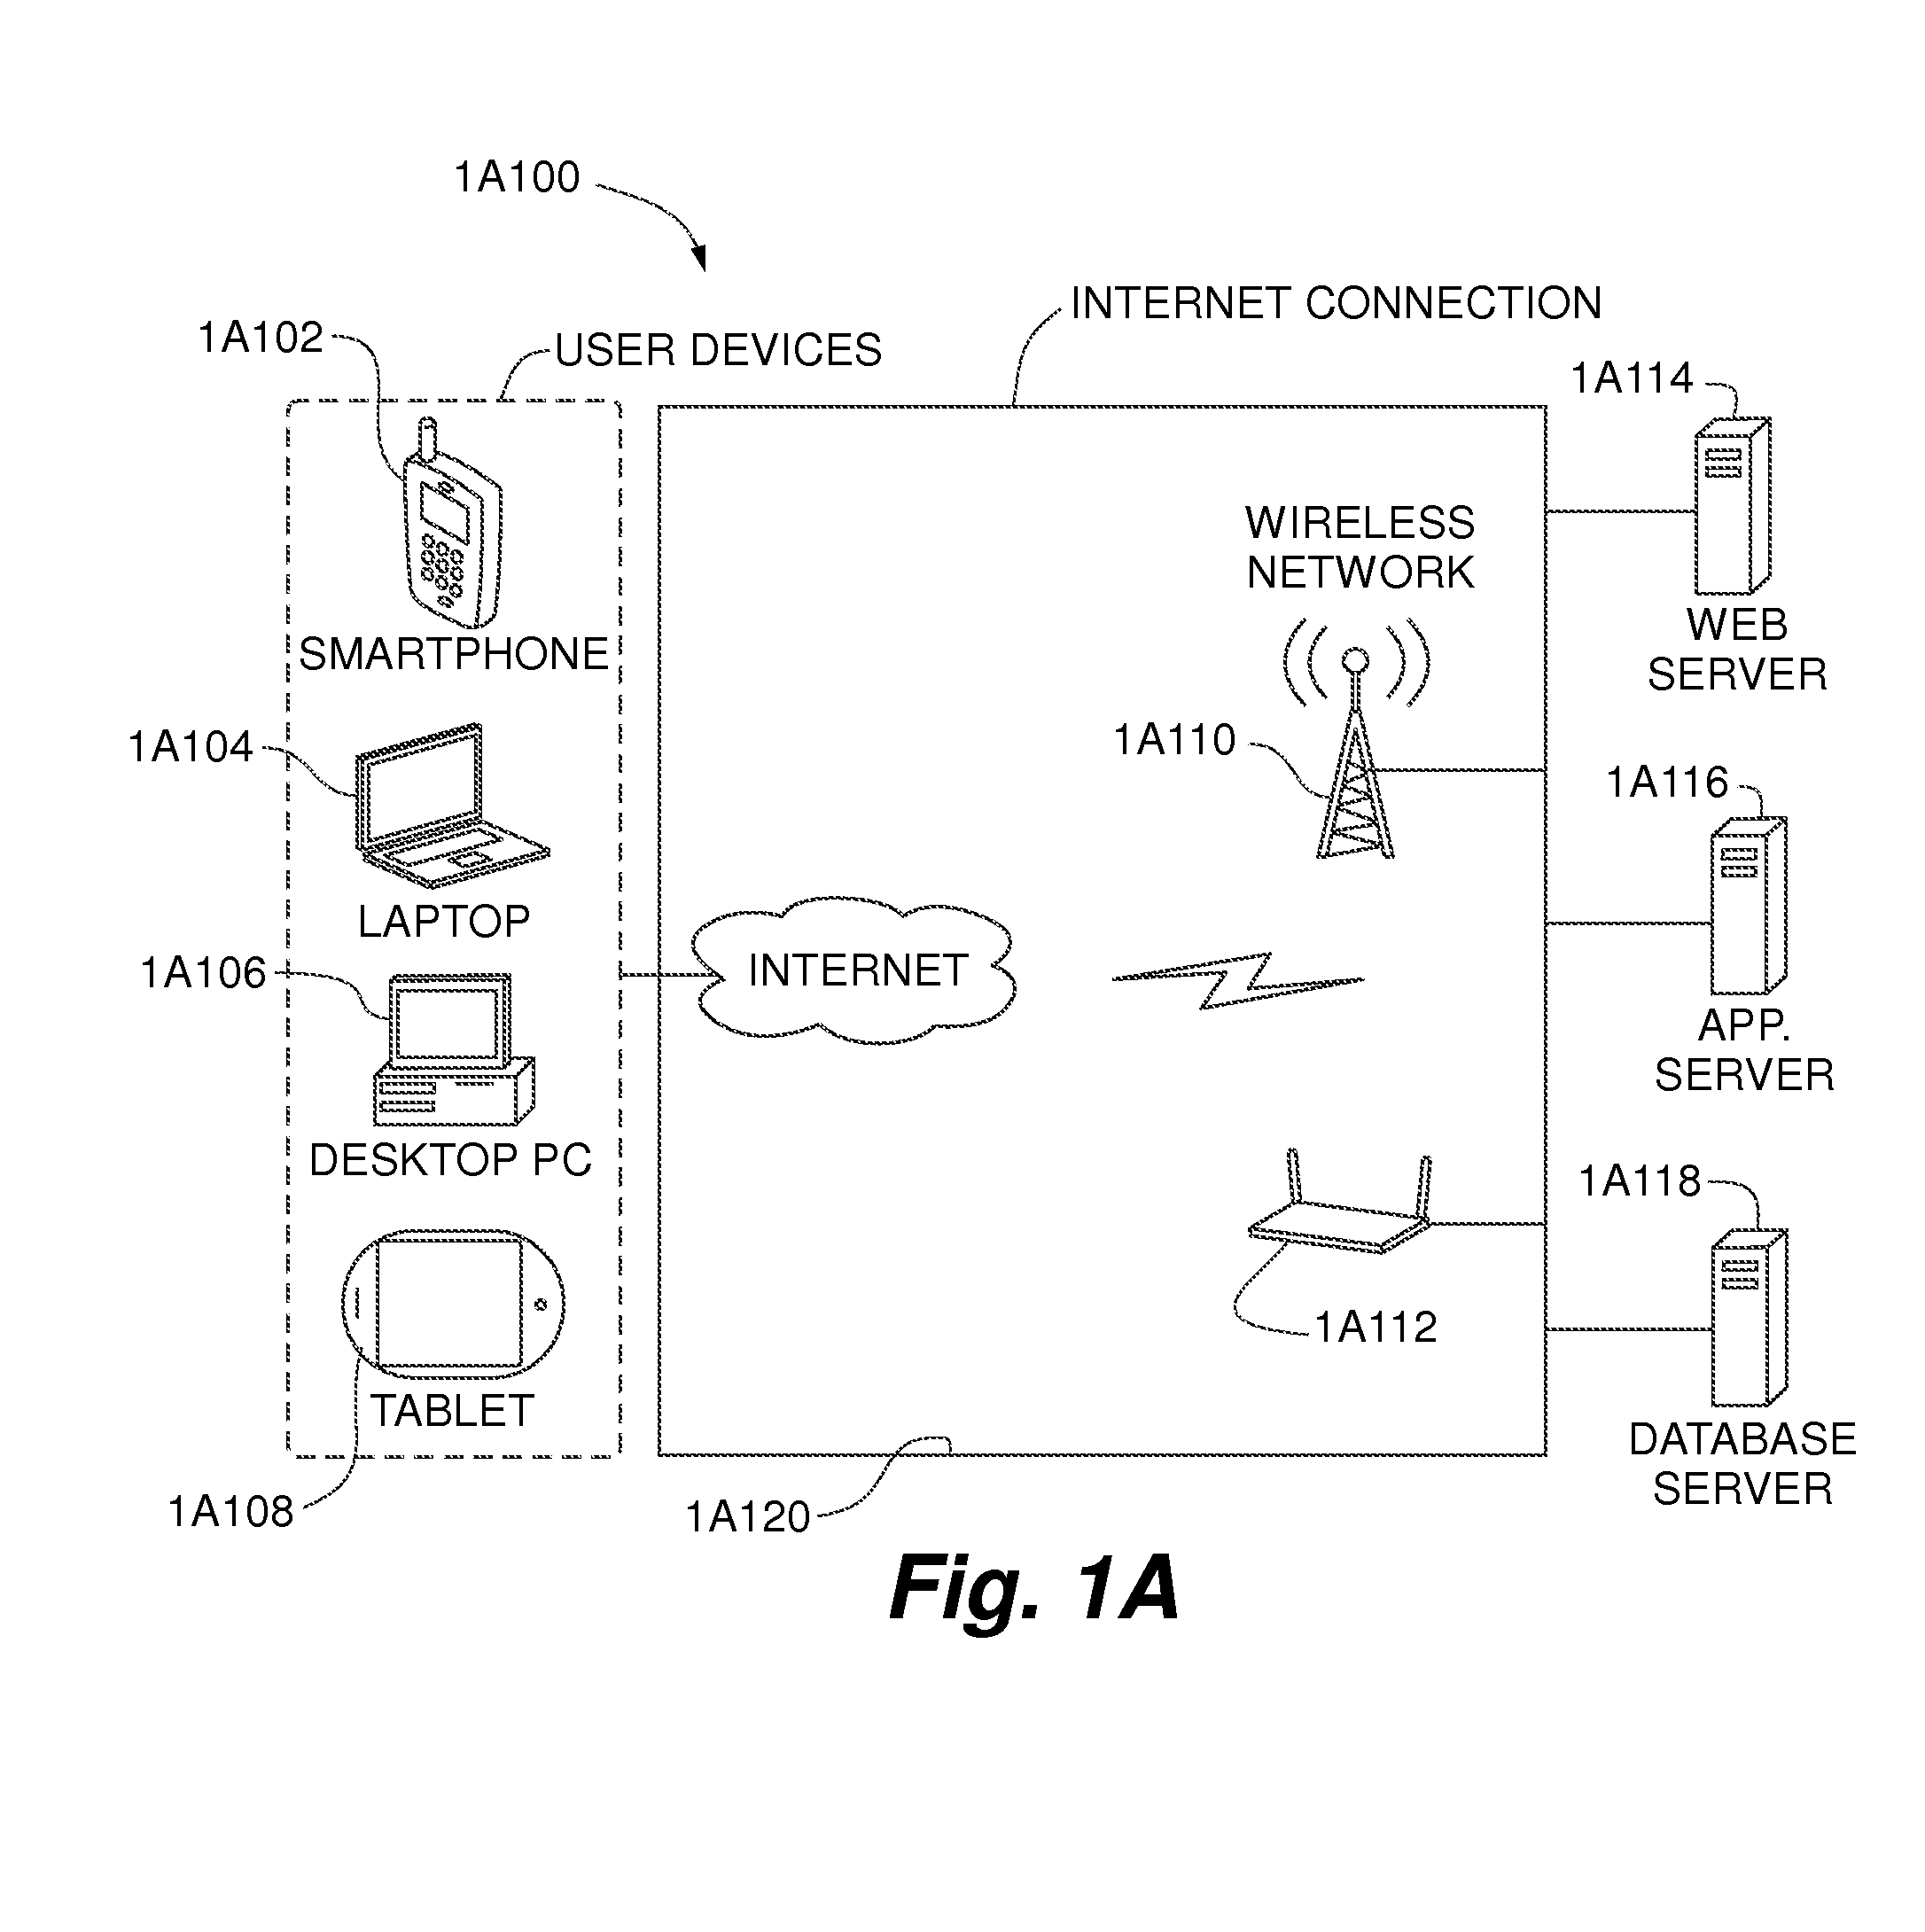 Methods and systems for background uploading of media files for improved user experience in production of media-based products